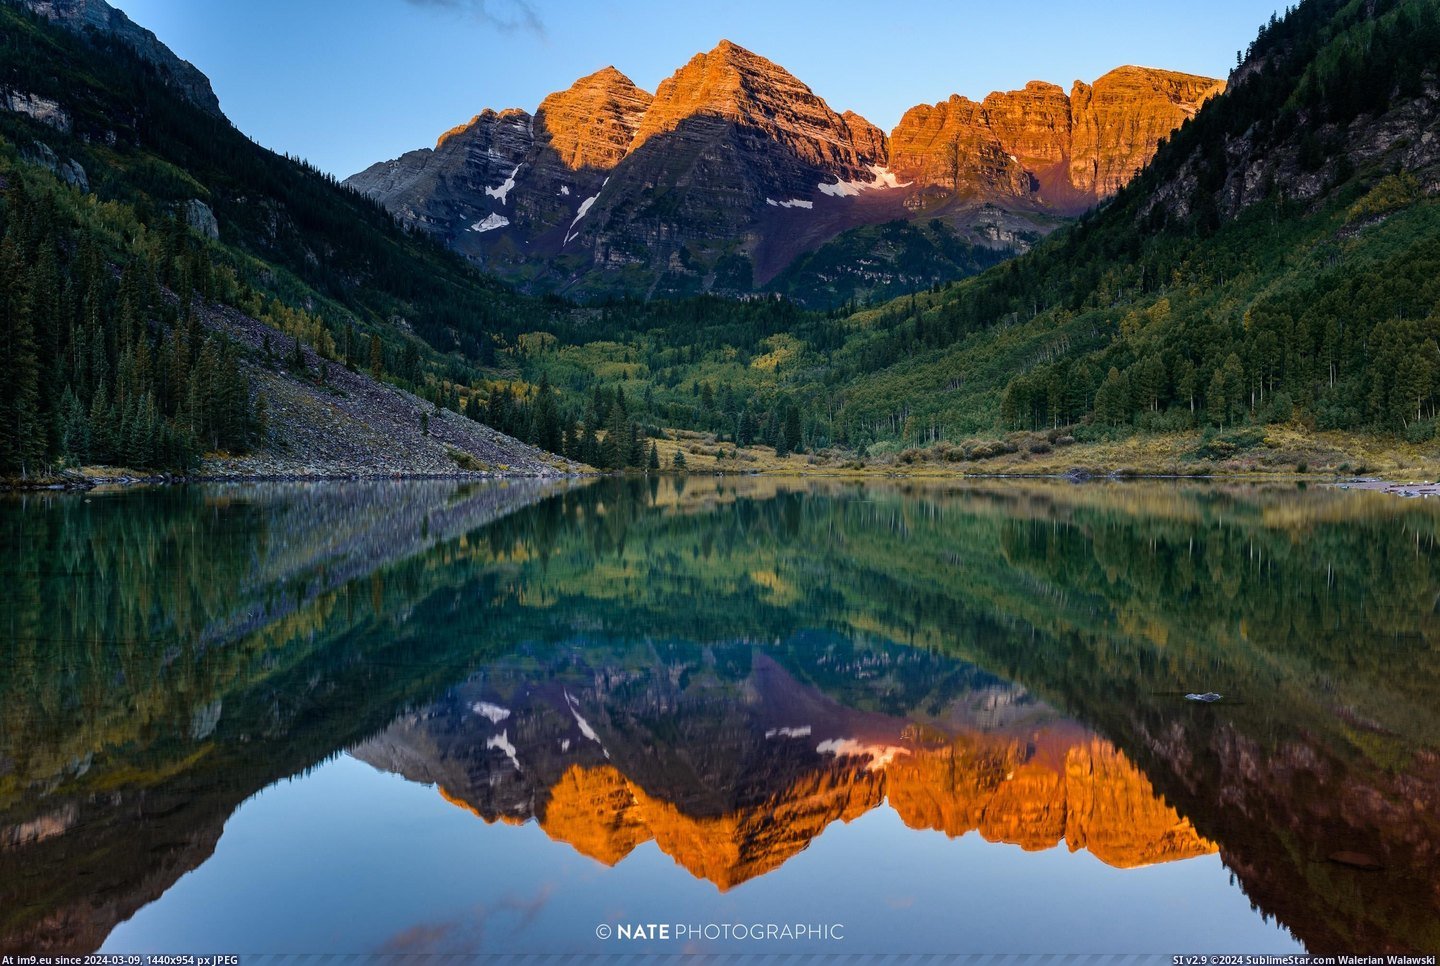 #Shots #Sunrise #Card #Maroon #Memory #Hiked #Battery #Died #Bells #Stranger [Earthporn] Hiked to Maroon Bells, CO for sunrise. Battery died. A stranger let me take a few shots with my memory card in his c Pic. (Image of album My r/EARTHPORN favs))